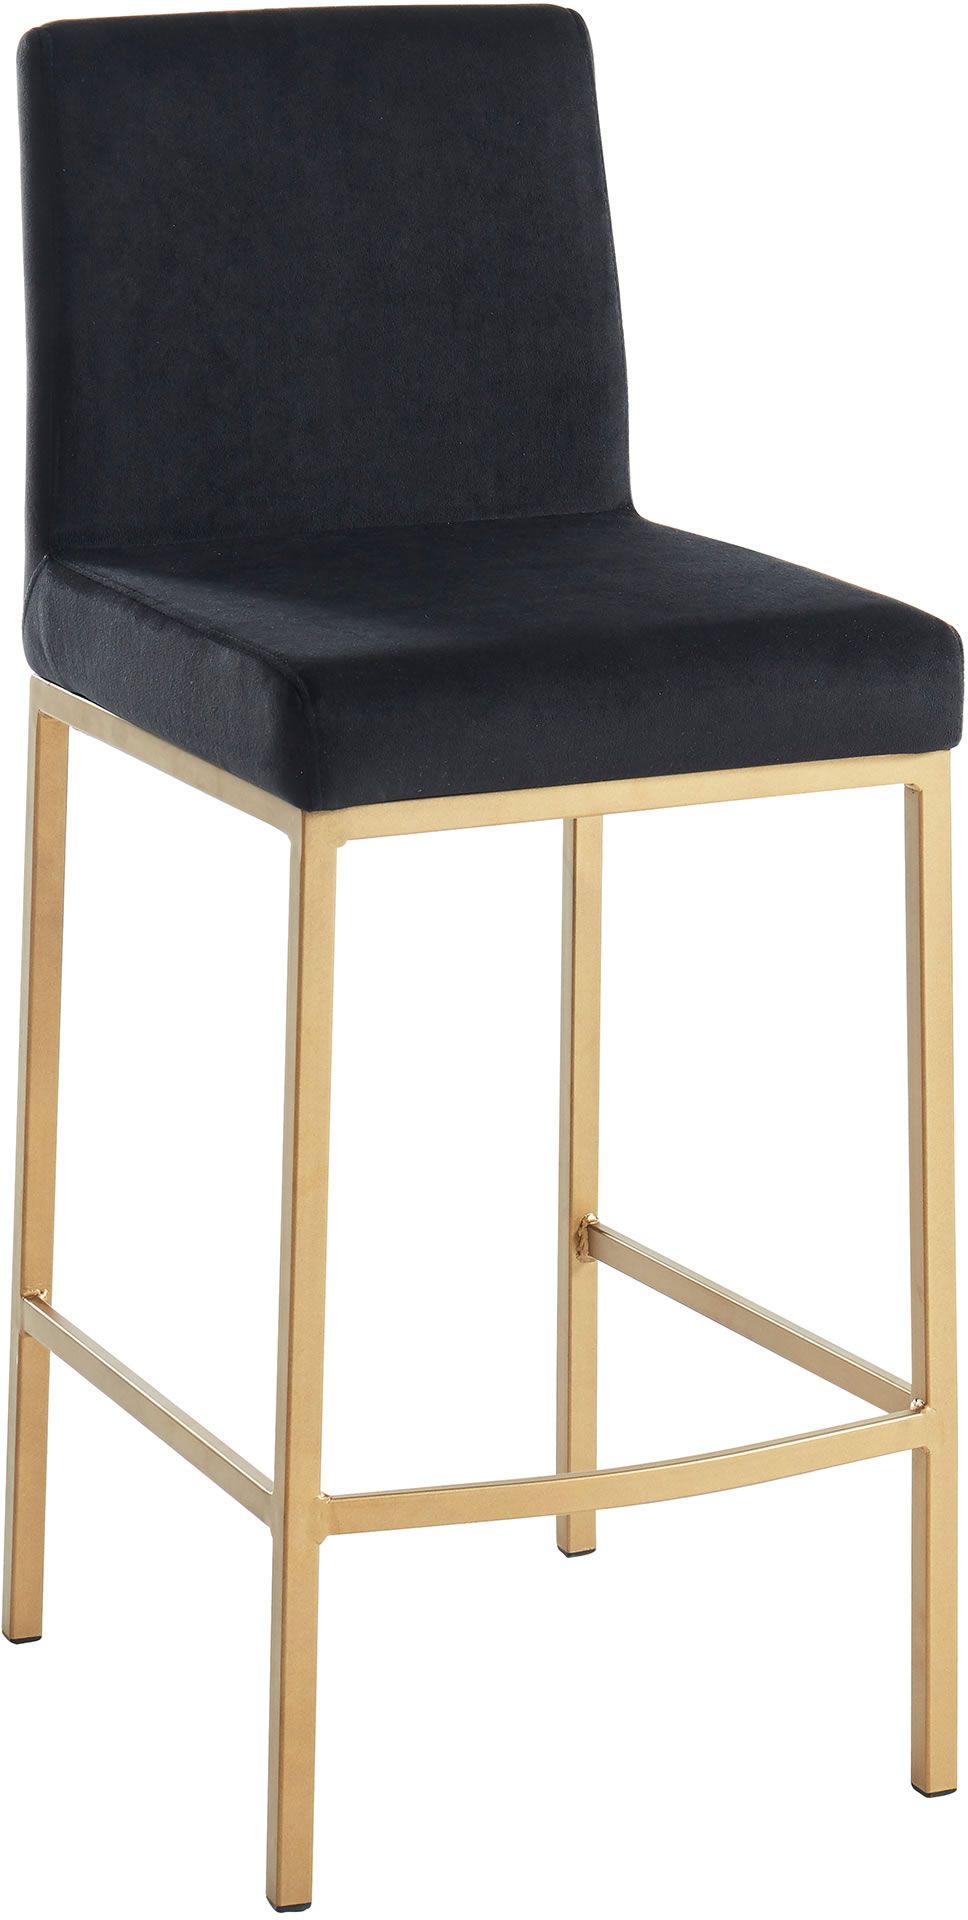 Nspire Diego 26 Inch Counter Stool Set, Bar Stools With Gold Legs